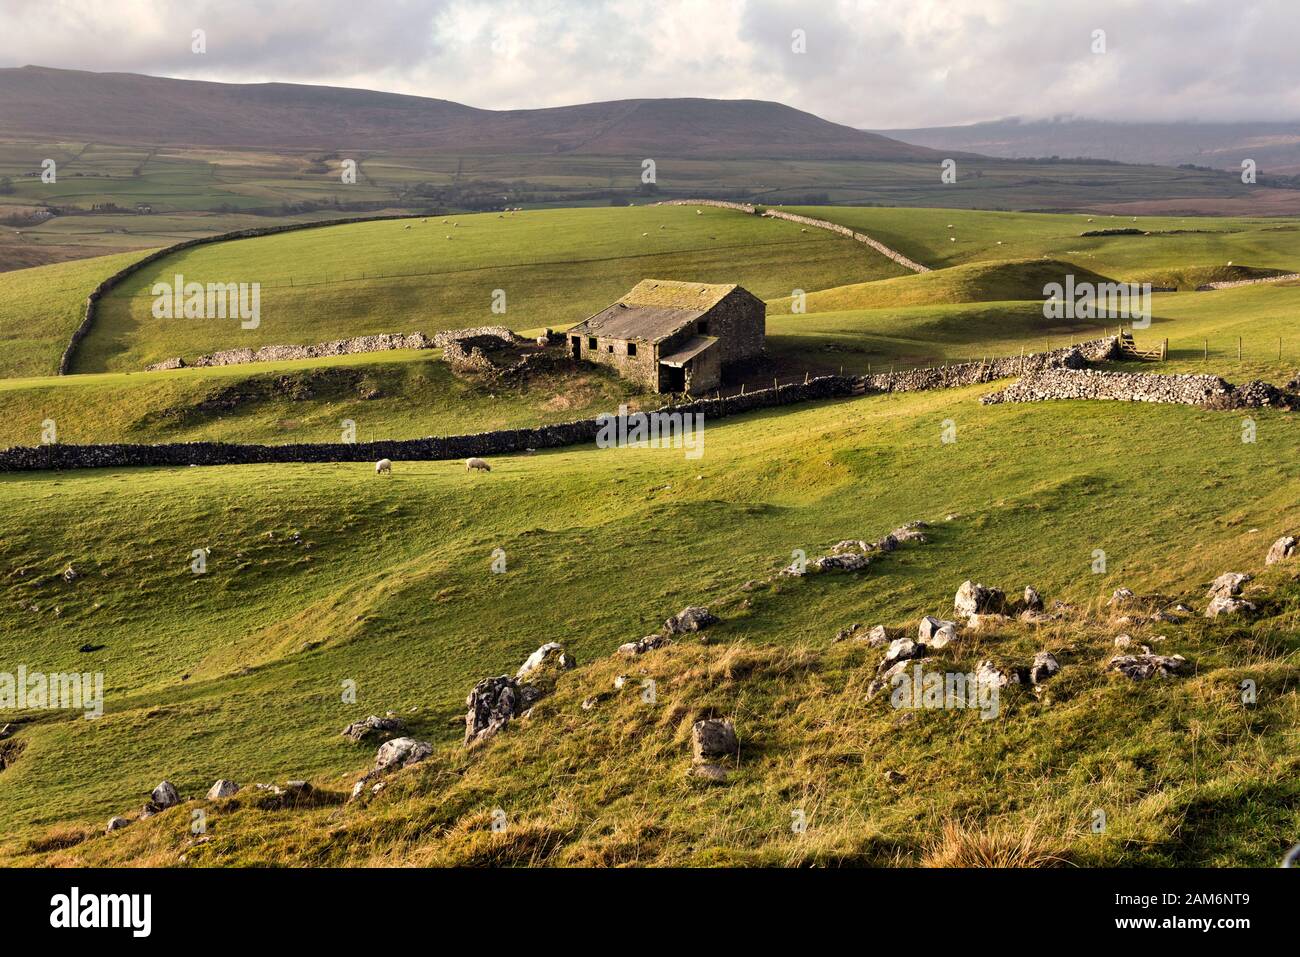 Sheep graze in the Yorkshire Dales near Horton-in-Ribblesdale. Central is a typical old dales barn or 'cow house'. The hillocks are glacial drumlins. Stock Photo